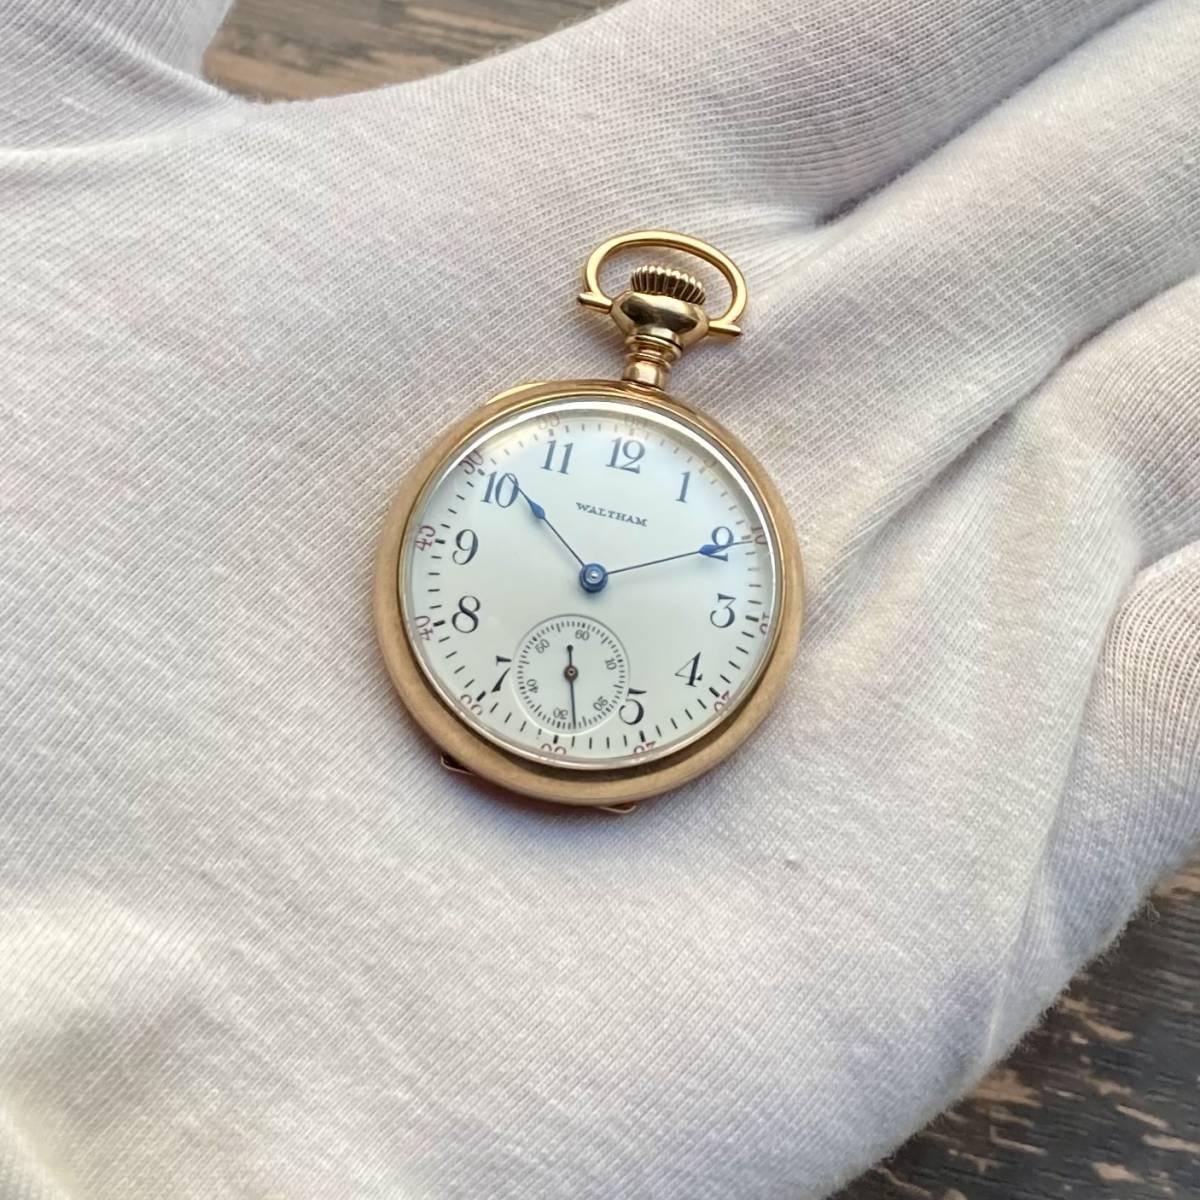 Waltham Pocket Watch Antique Manual Open Face 31mm Gold - Murphy Johnson Watches Co.